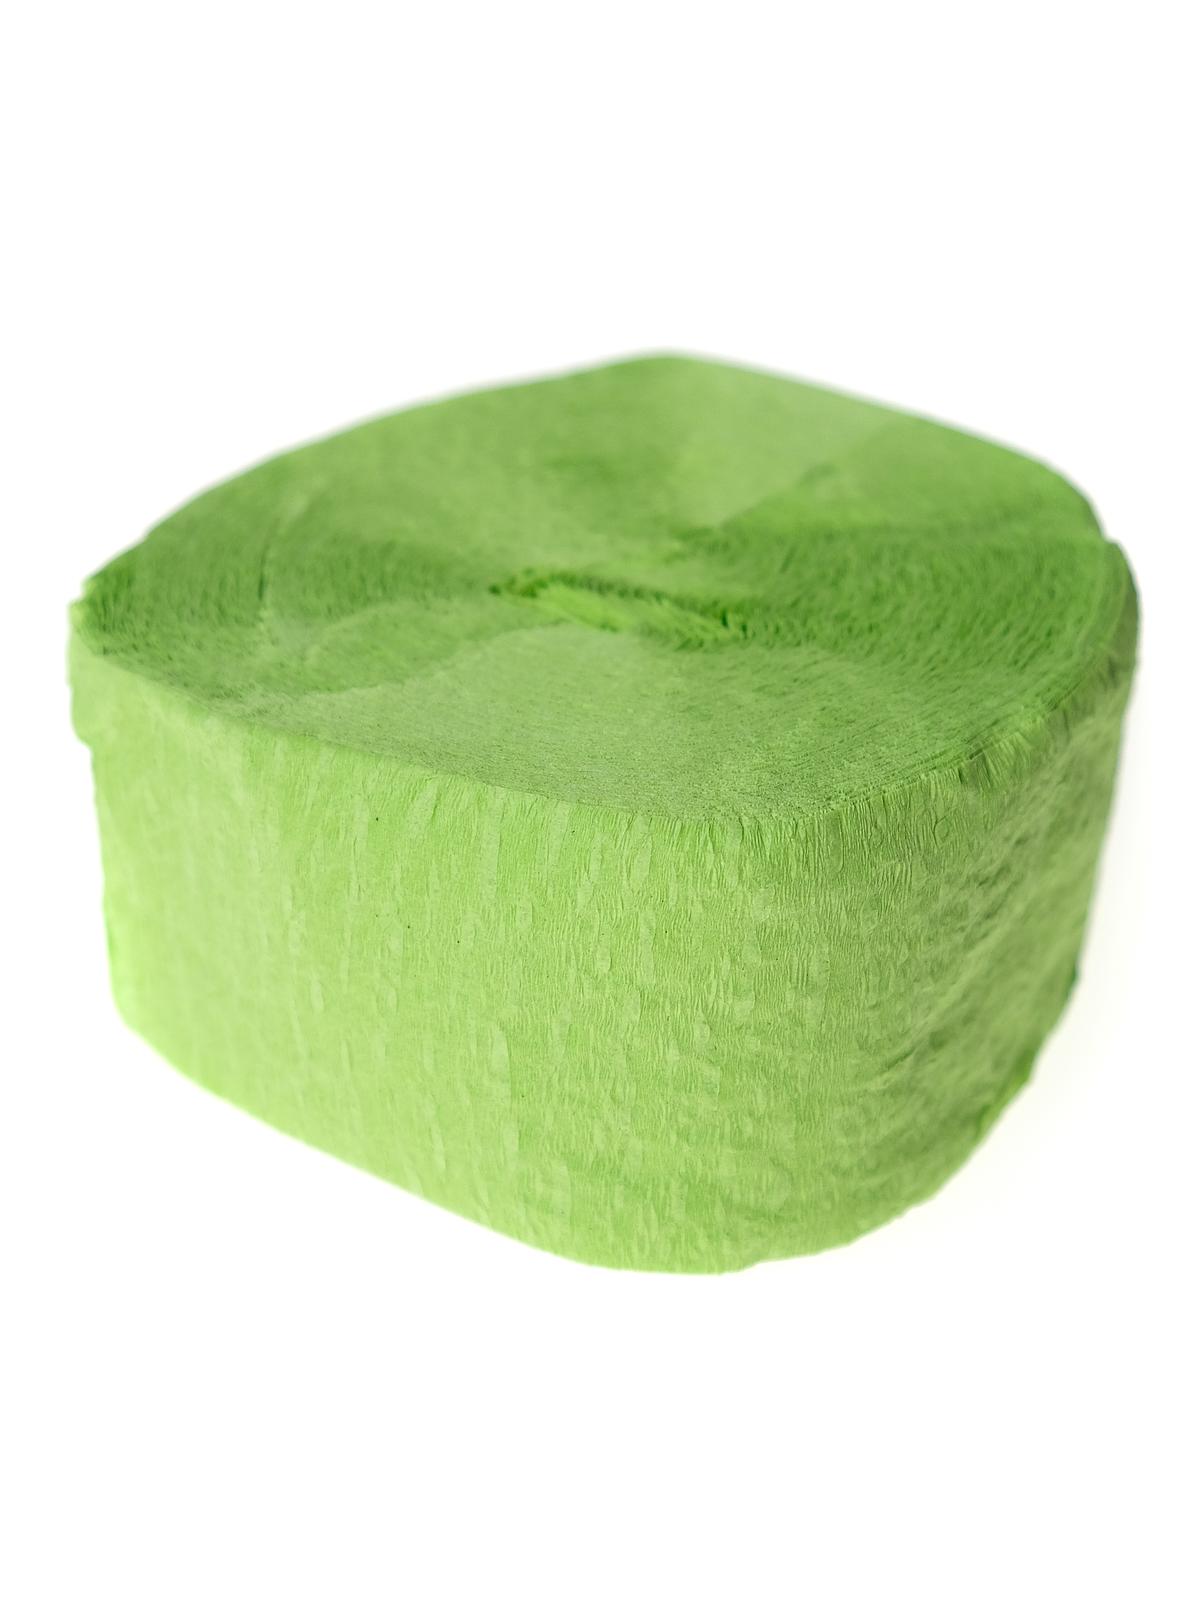 Crepe Paper Streamers 1.75 In. X 81 Ft. Light Green